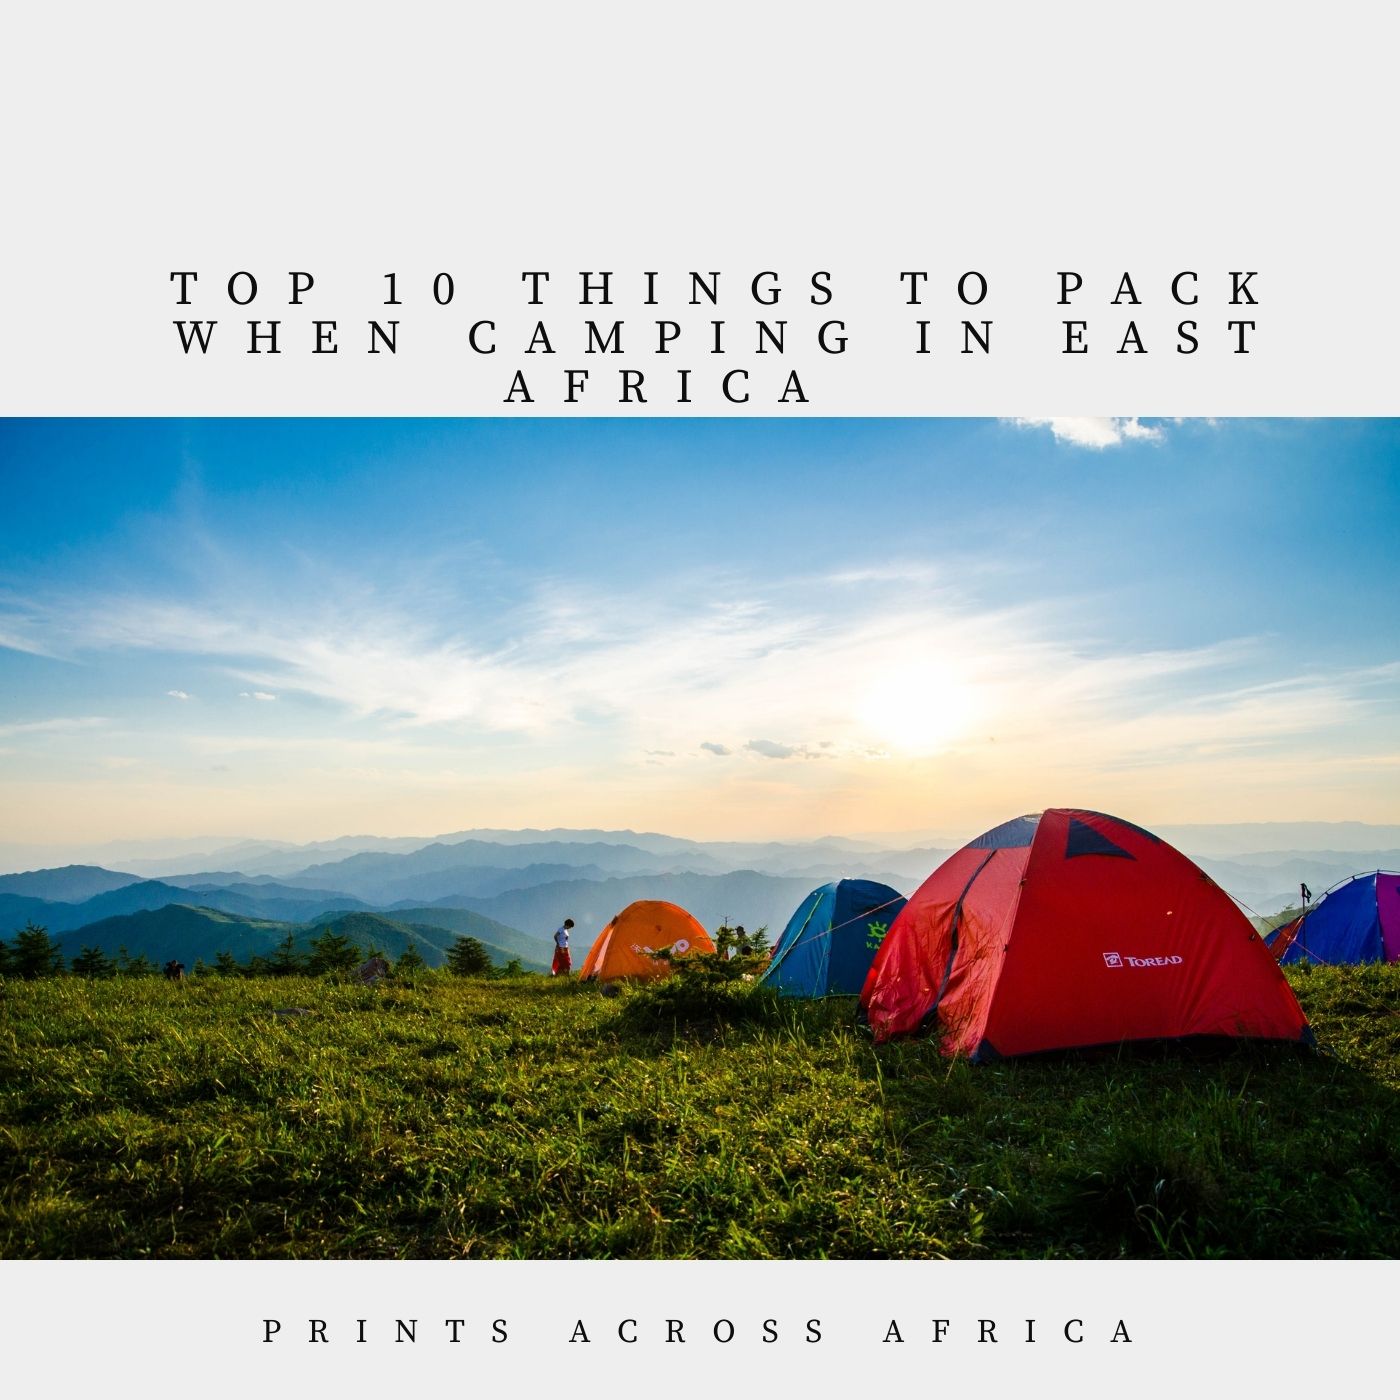 Top 10 things to pack for camping in East Africa